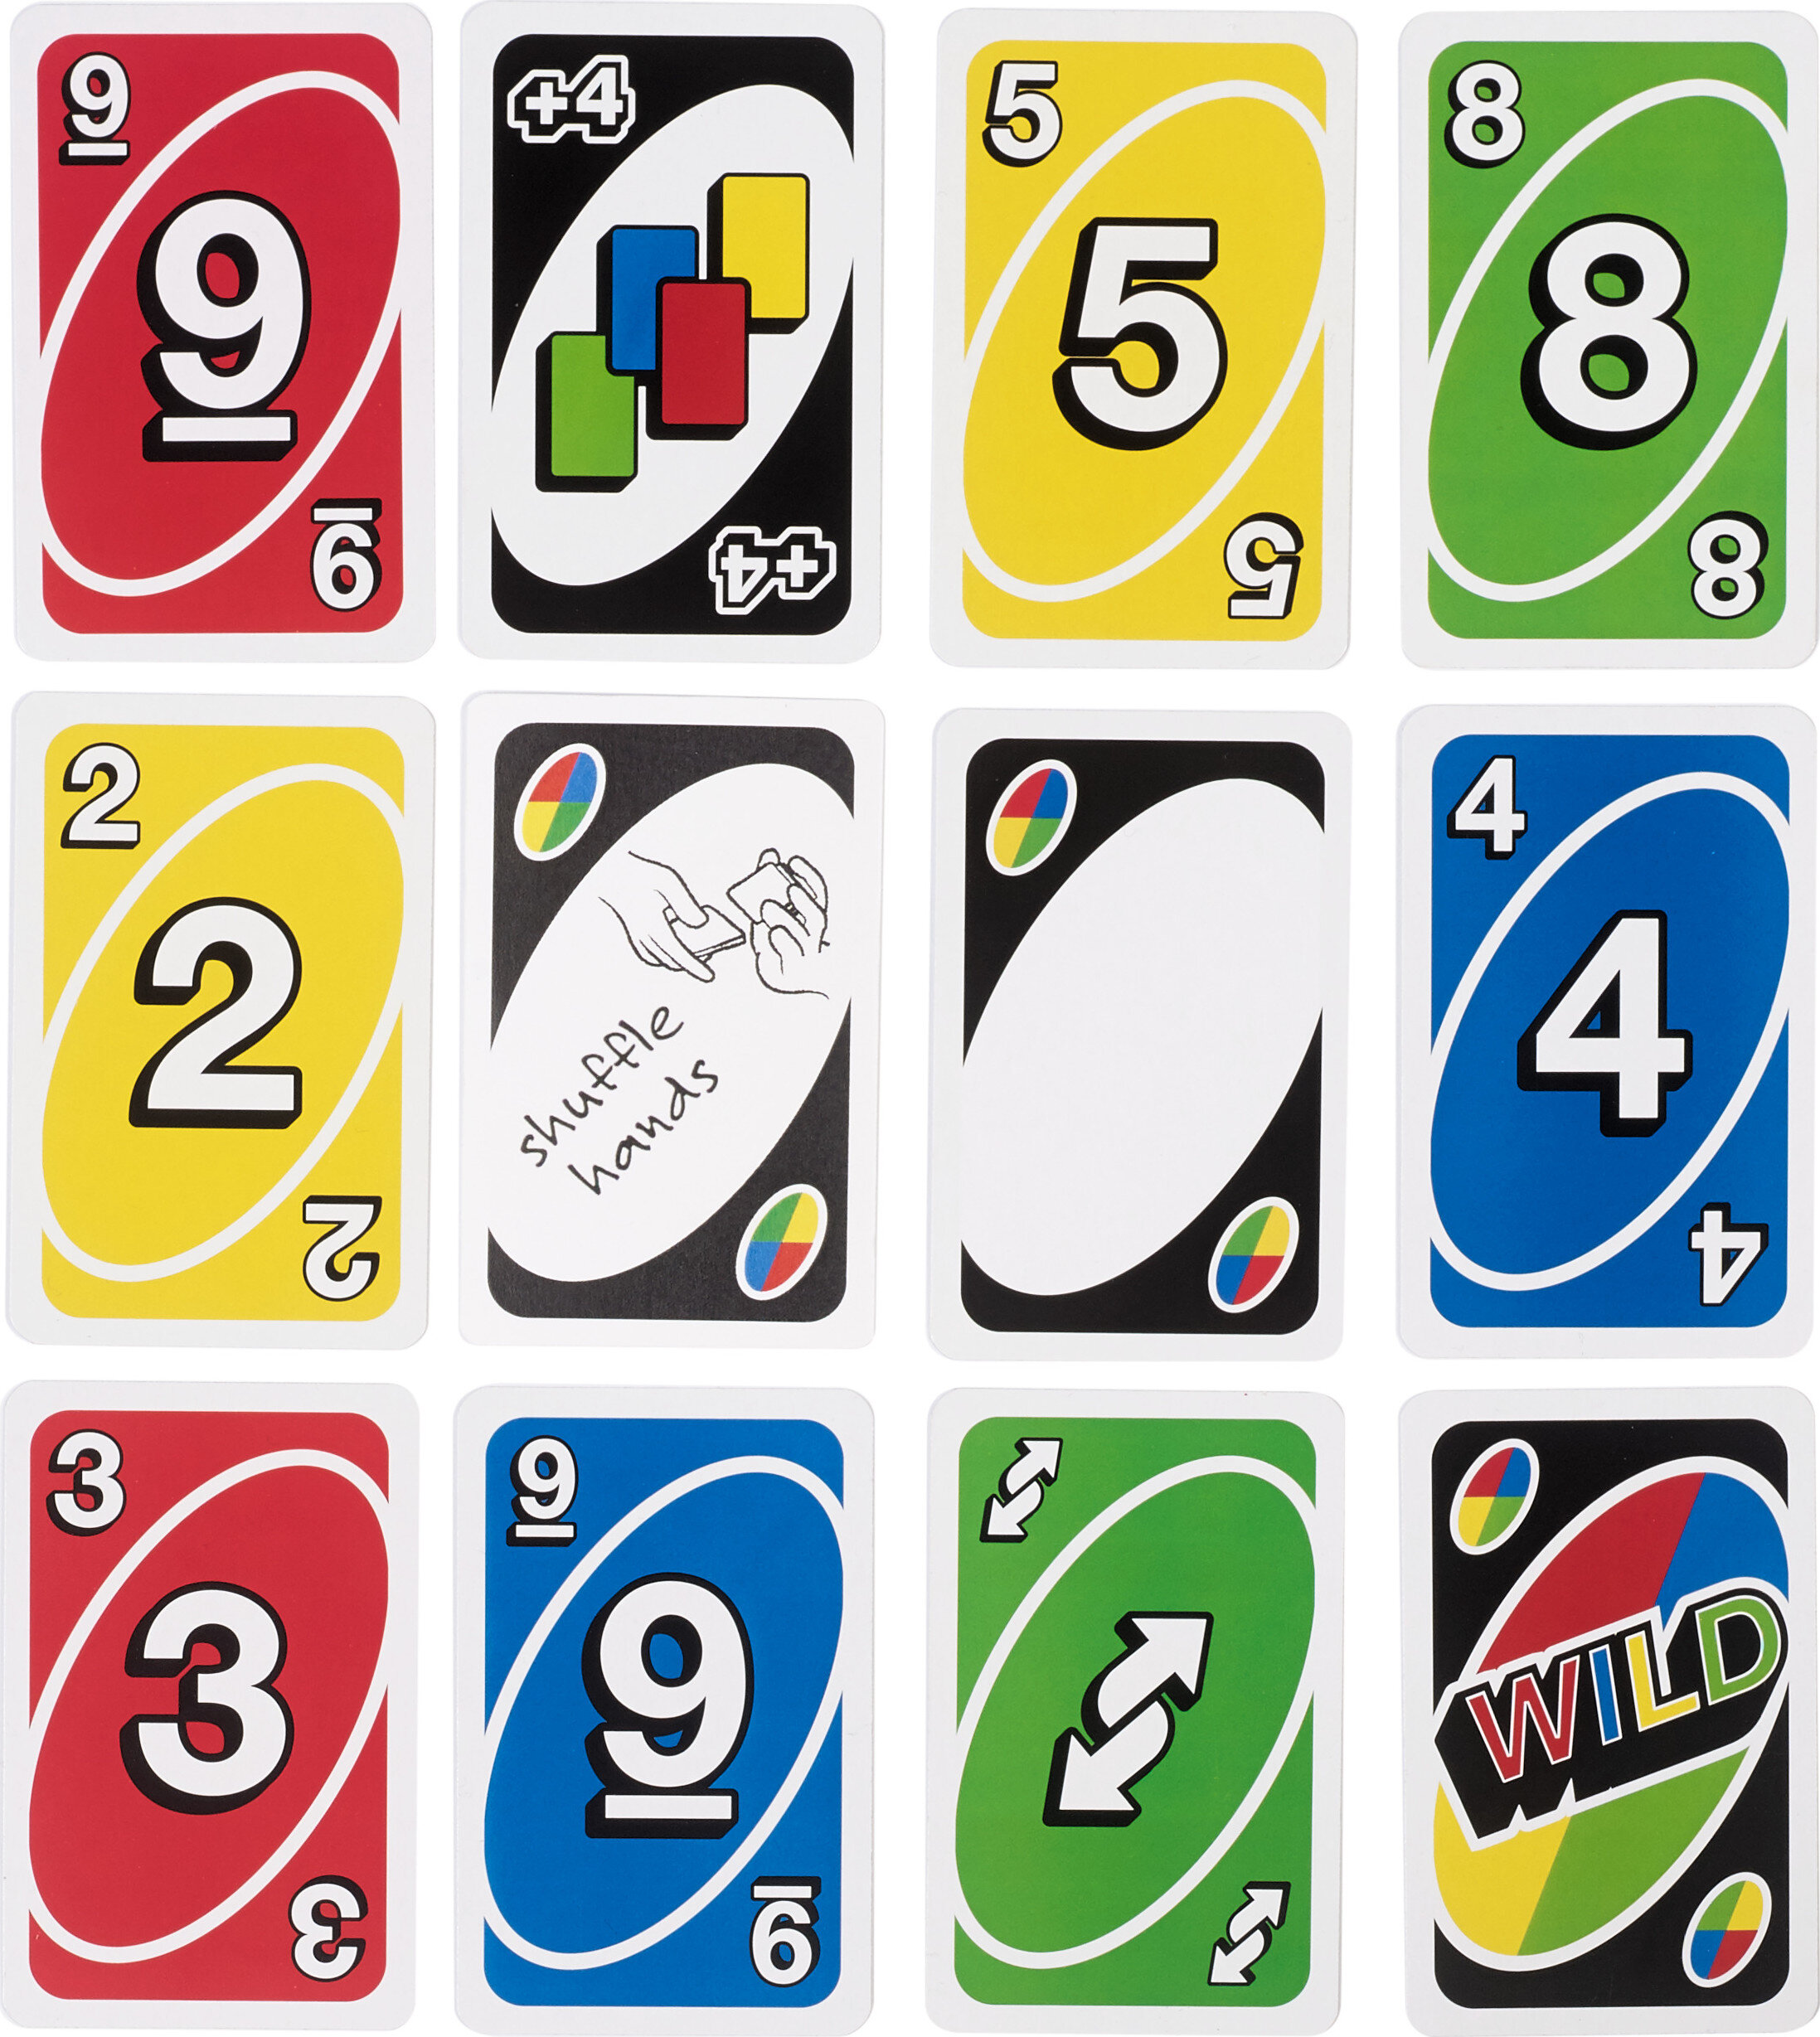 UNO Card Game for Kids, Adults & Family Game Night, Original UNO Game of Matching Colors & Numbers - image 5 of 7